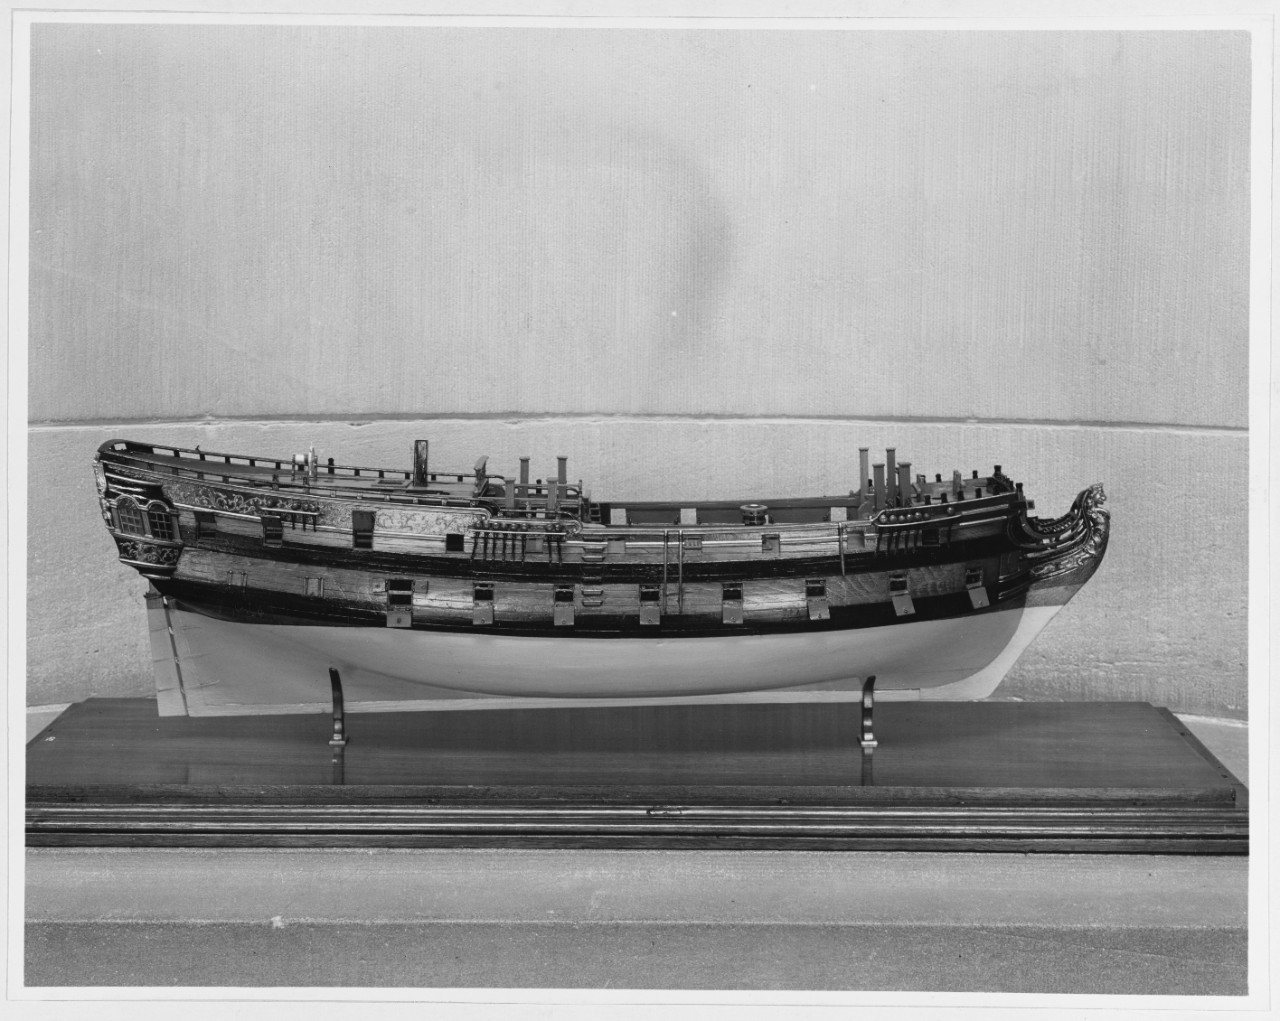 Model of a Fire Ship, H.H. Rogers Collection